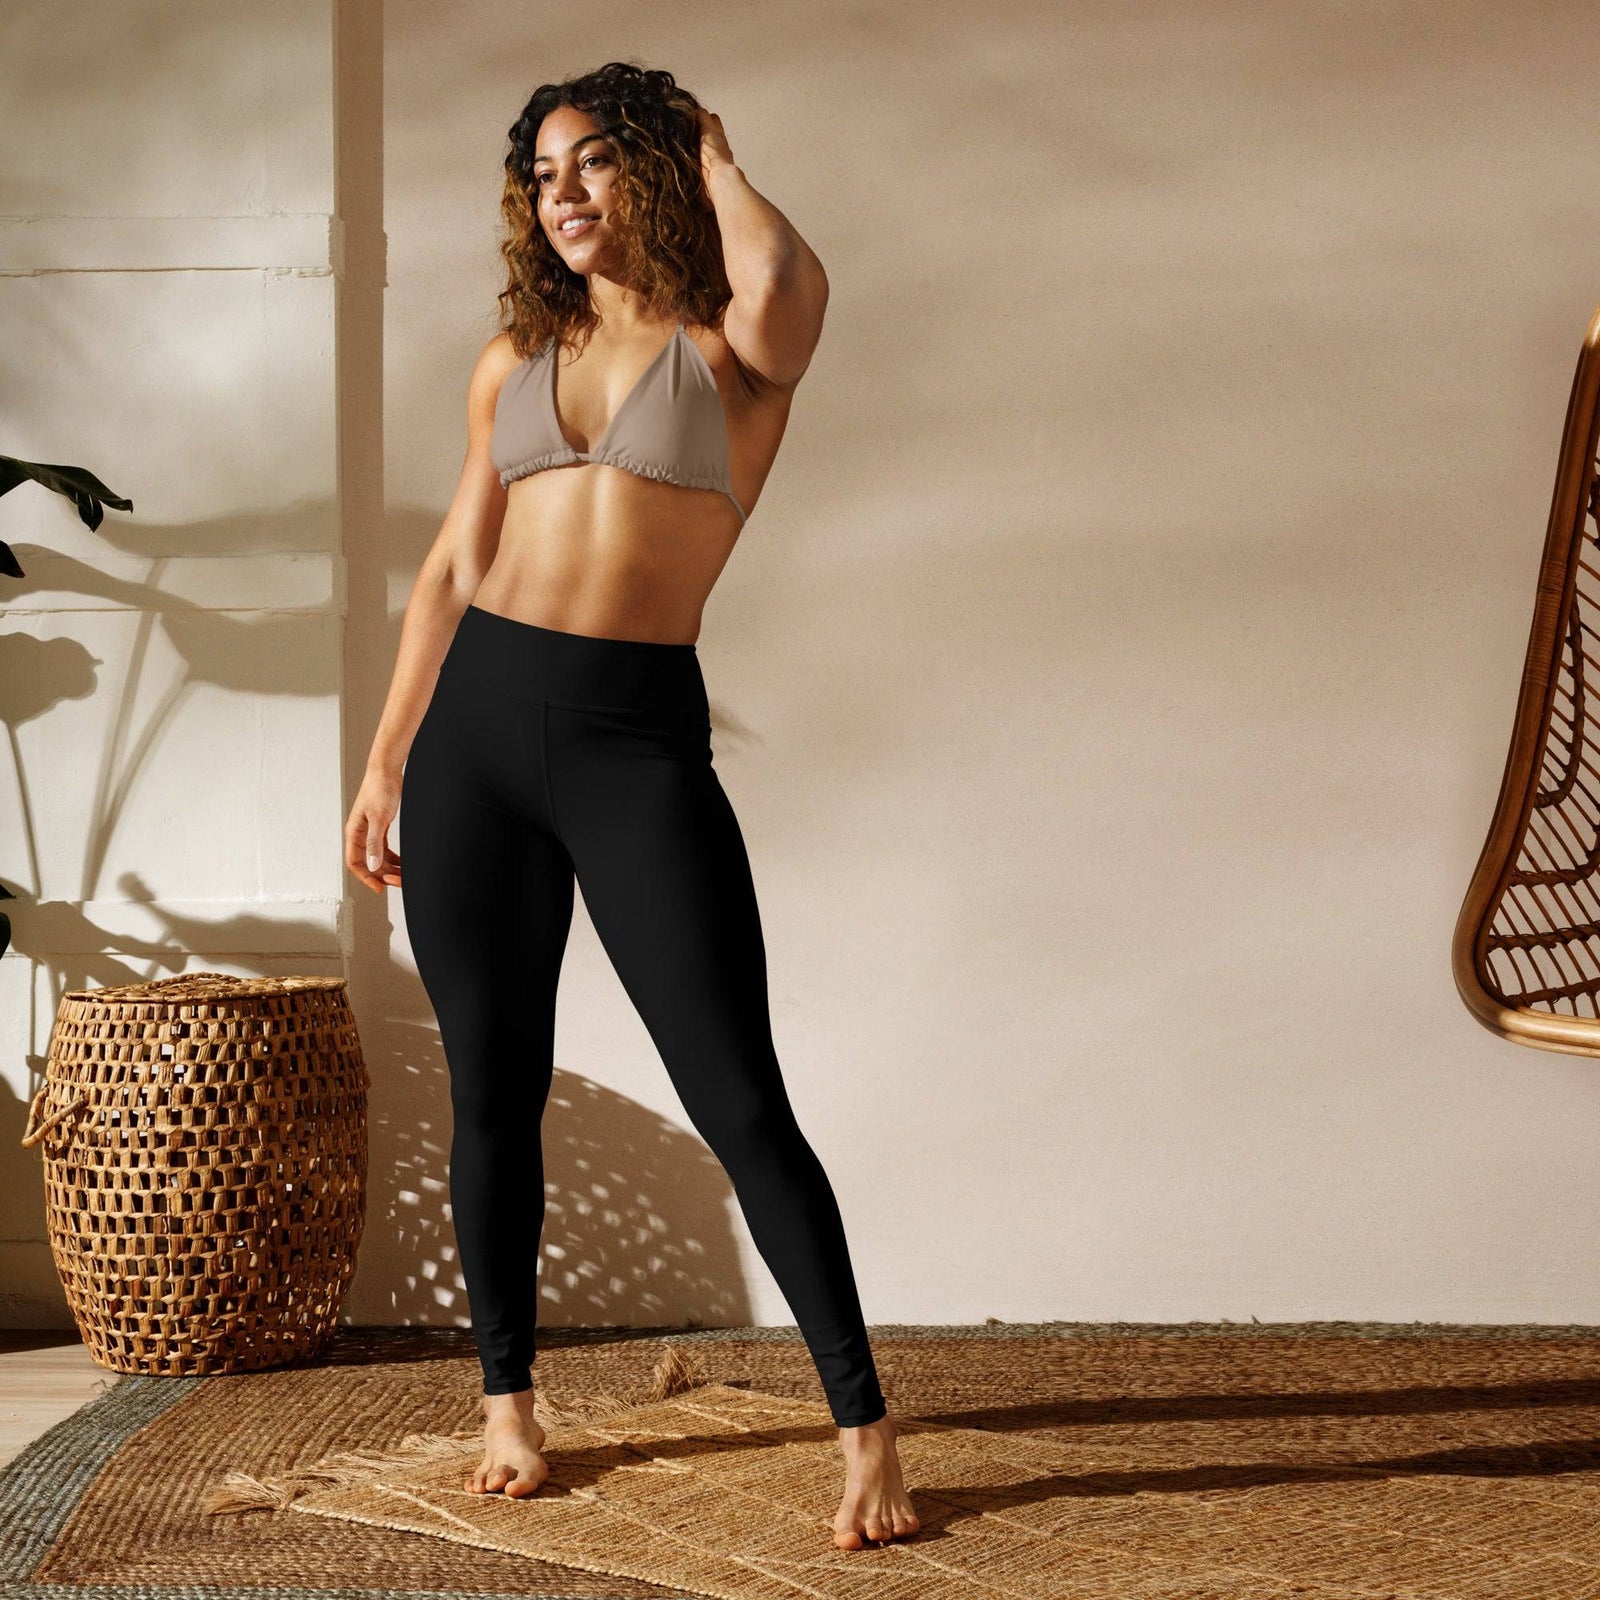 Supersoft Yoga Leggings in Black - Revive Wear     Supersoft Yoga Leggings. Feel super comfortable with these beautiful soft yoga pants! Shop Leggings on Sale at Revive Wear..